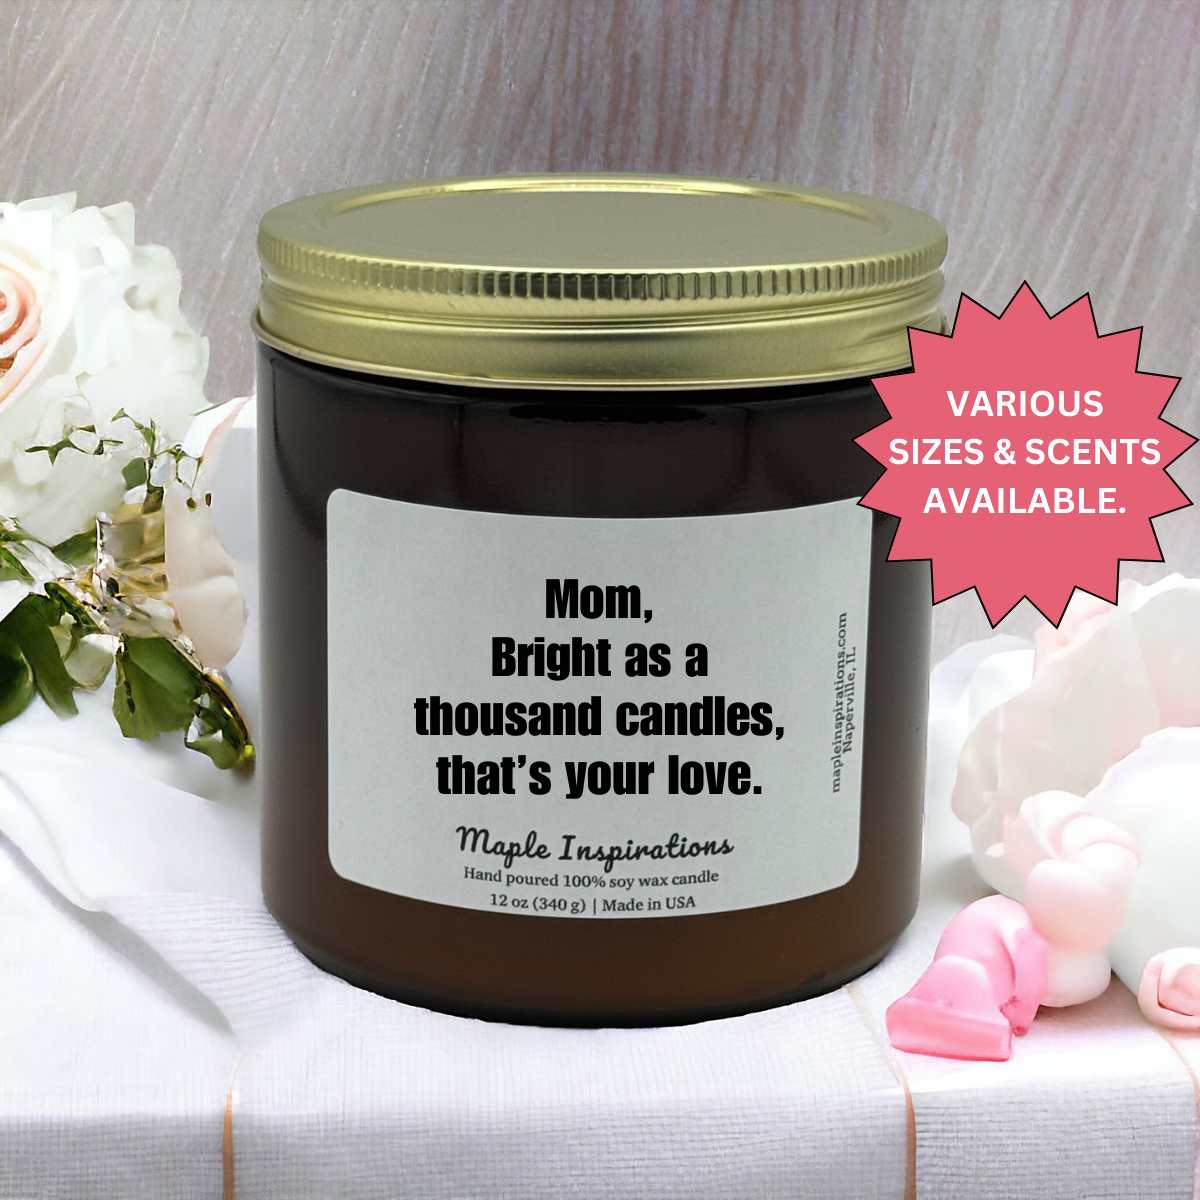 Candle Gift For Mom, Scented Candle, Mother's Day Gift for Mom, Wedding Gift Mom , Soy Candle Mom Birthday Gift, Mum, Gift From Daughter / Son, Mom thank you, Mom Candle